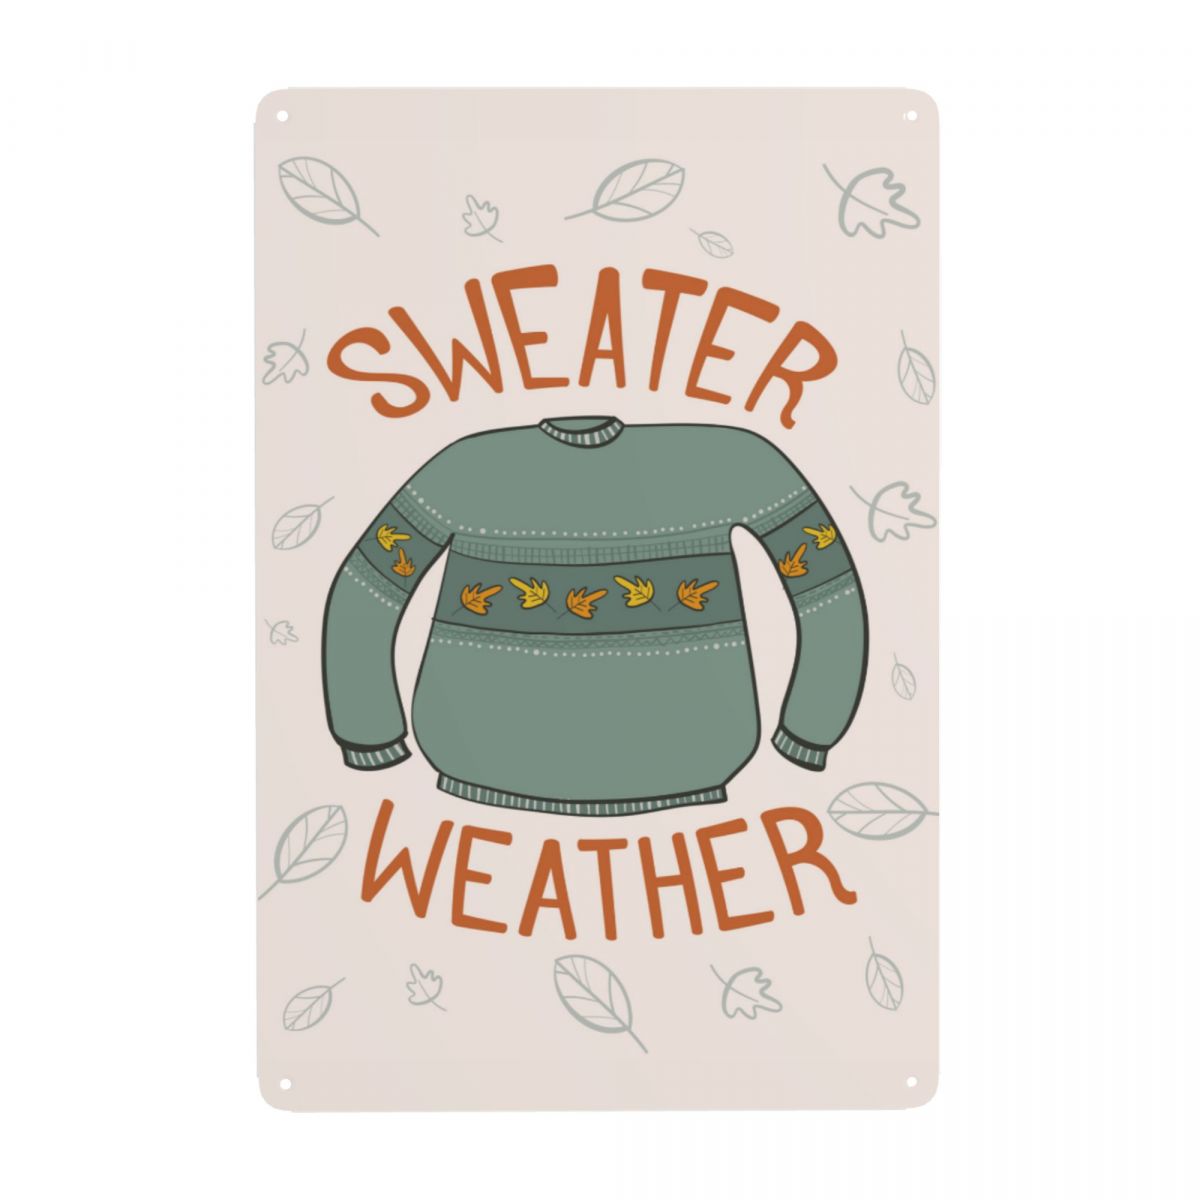 Autumn Sweater Weather Room Decor Metal Sign 12 X 8 INCH